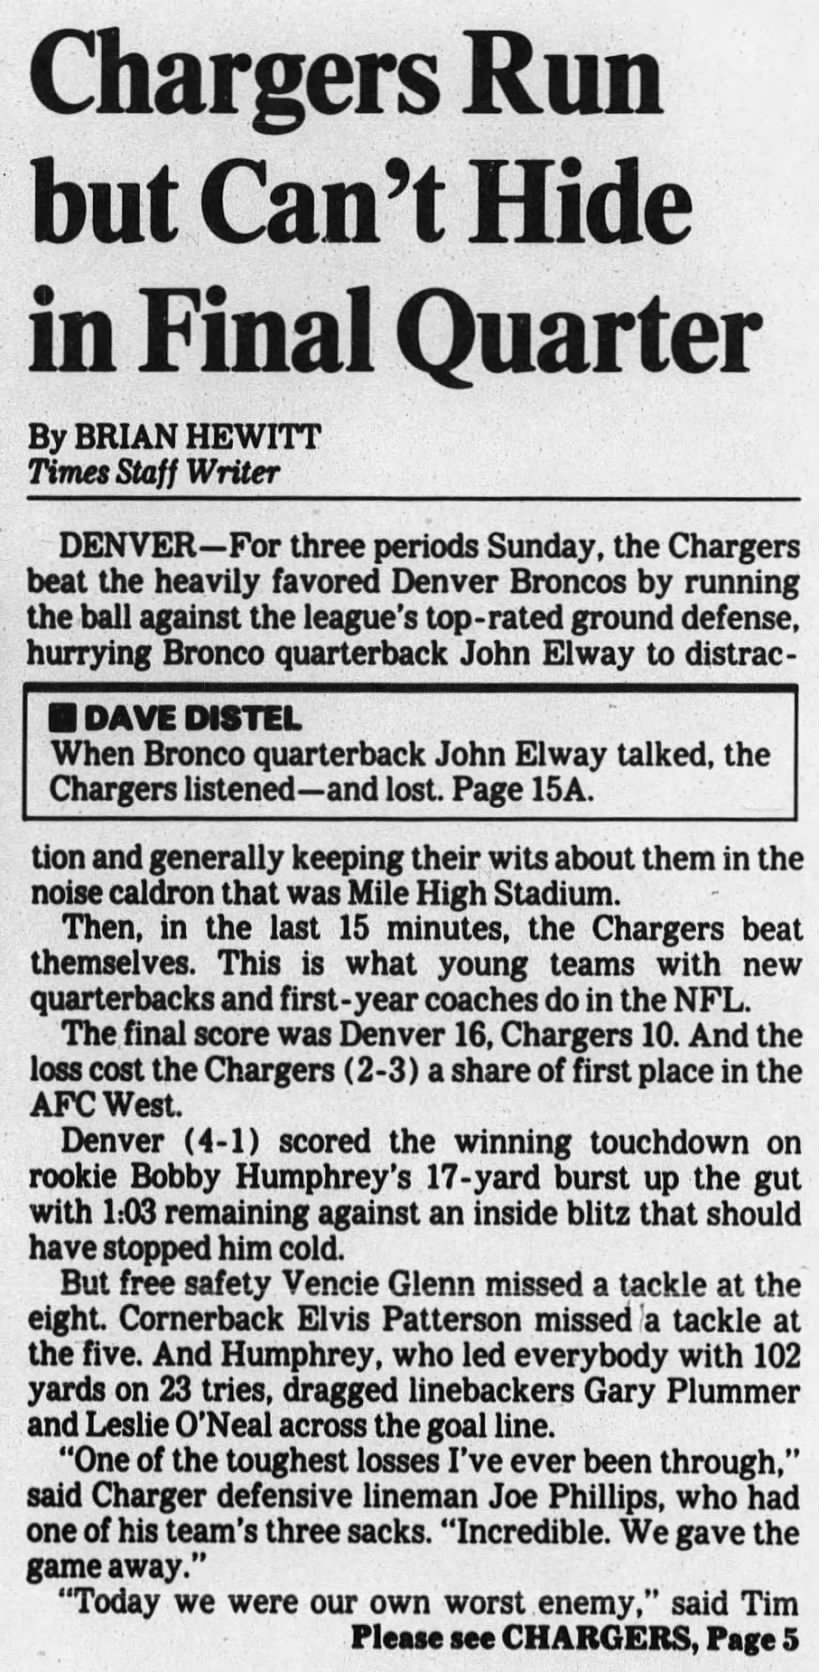 Chargers 10-16 Broncos, 9 Oct 1989